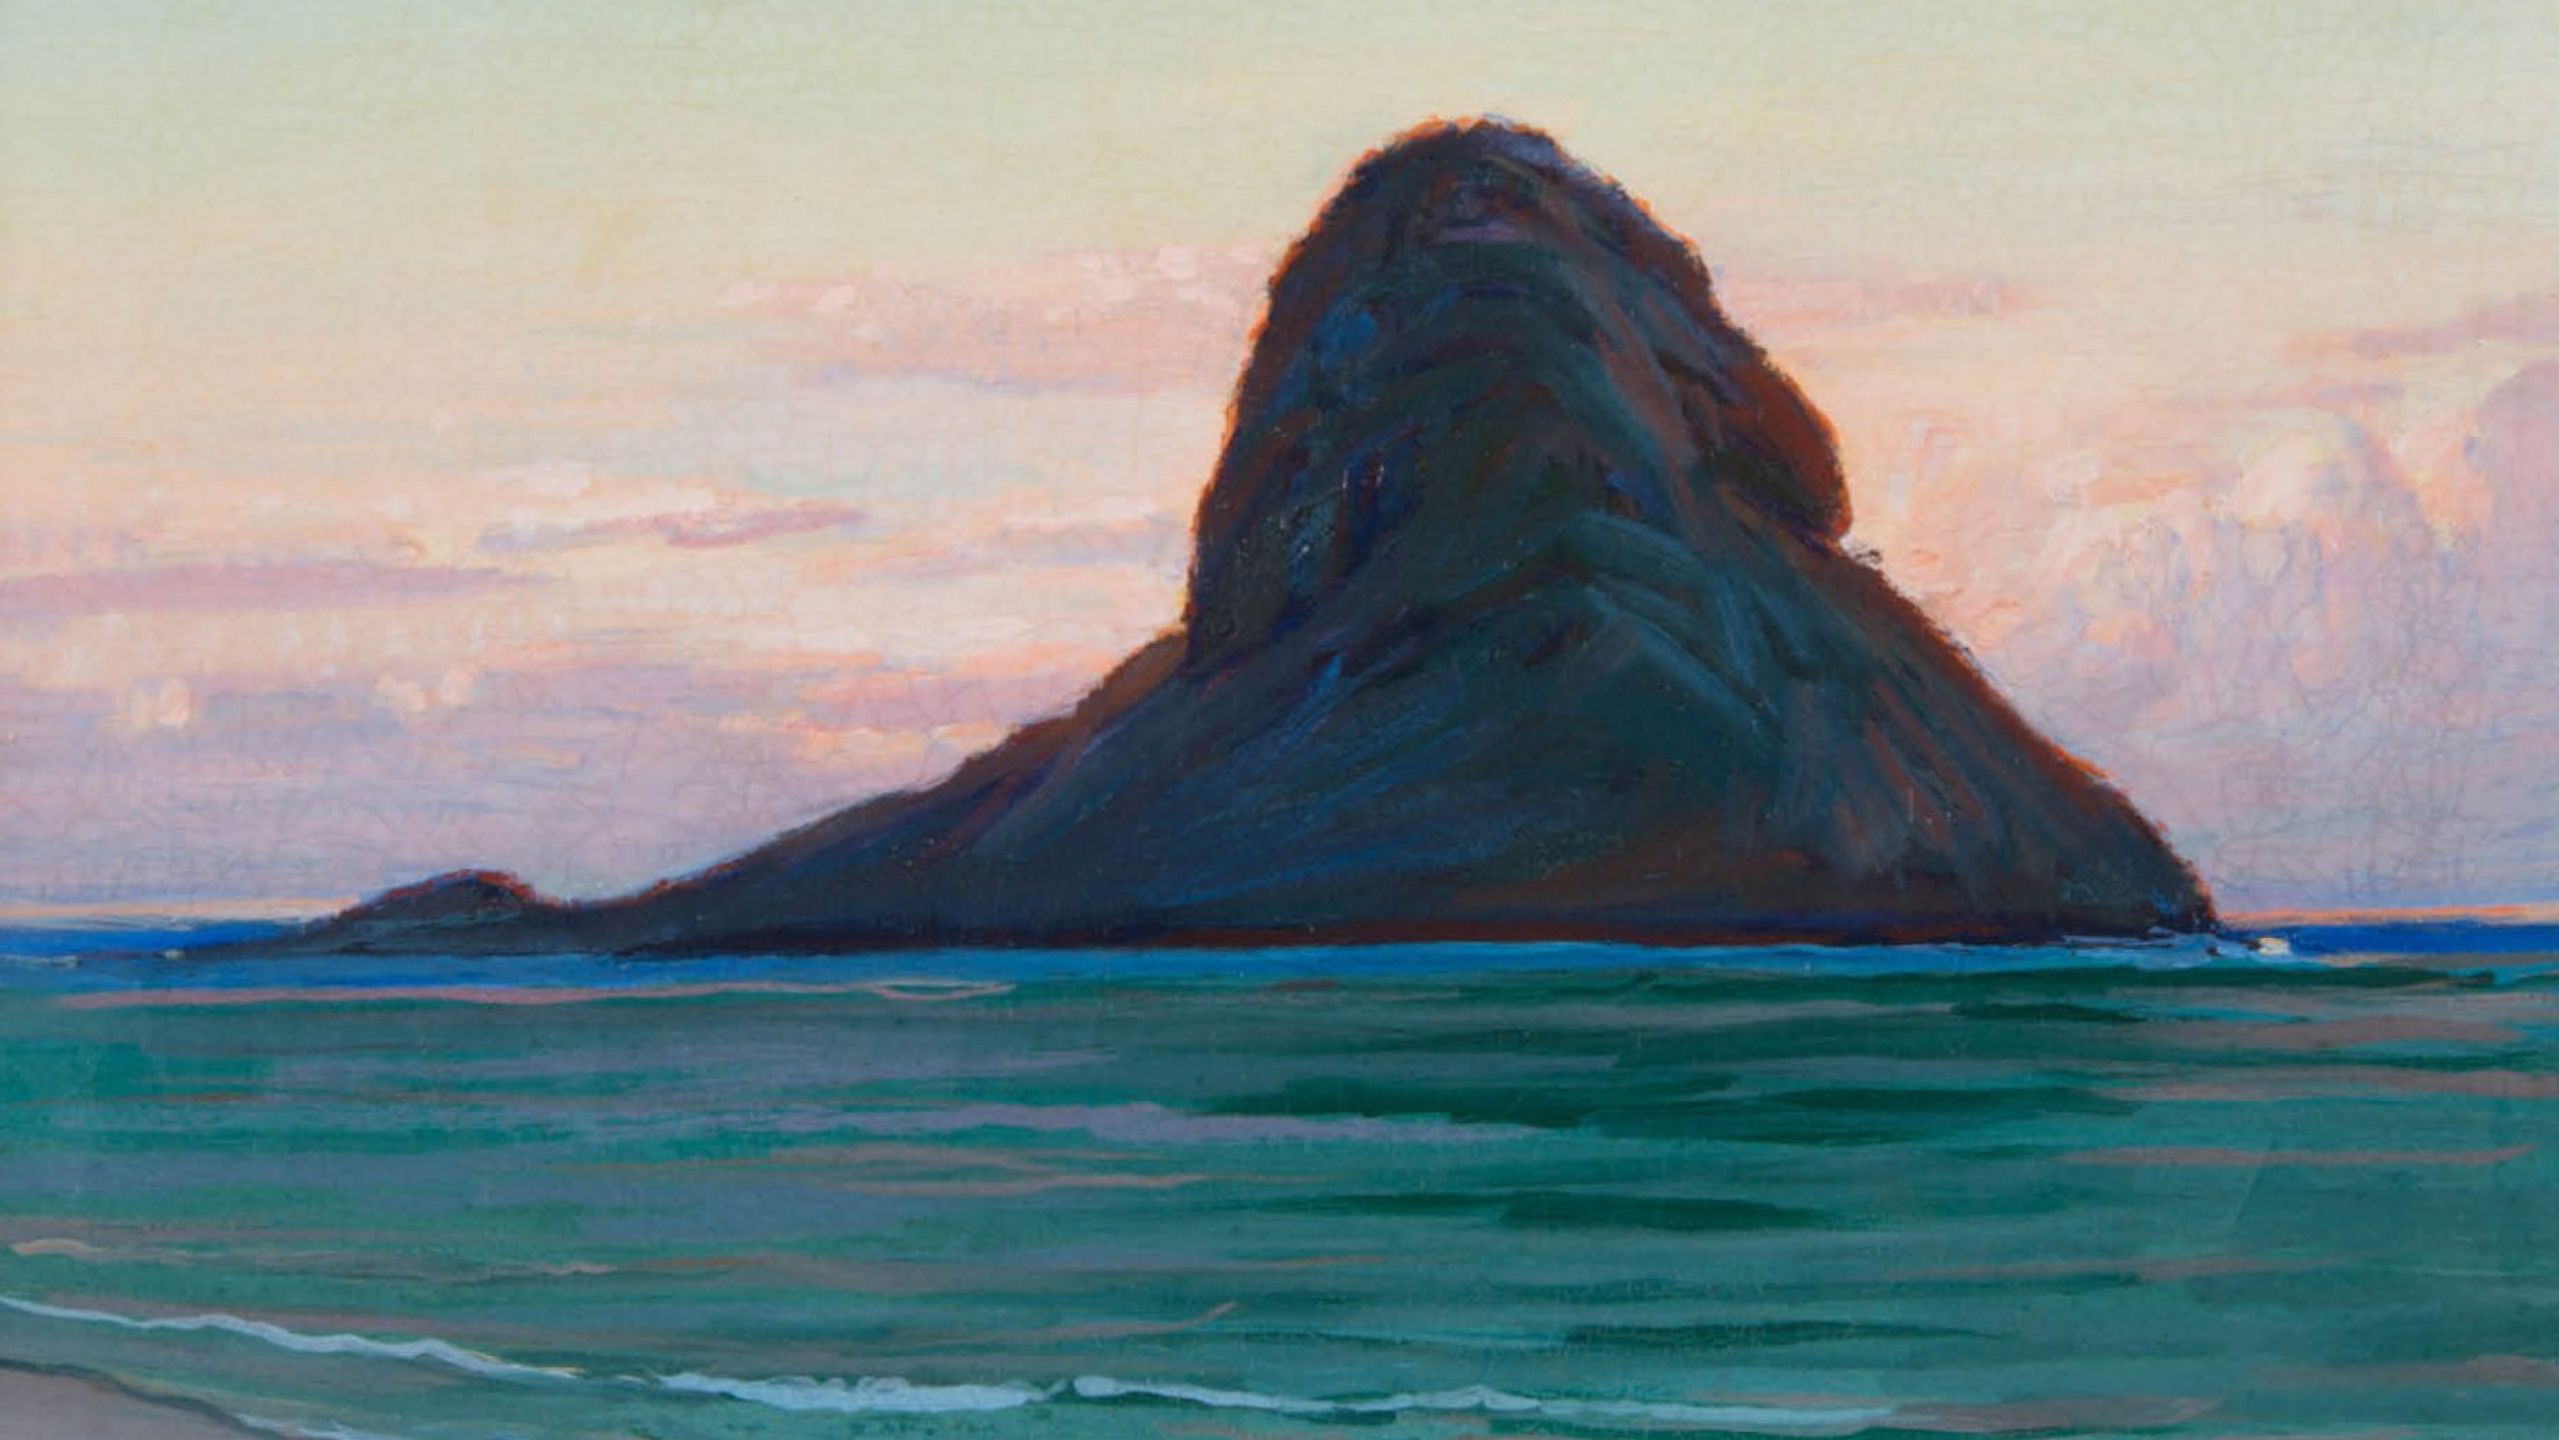 Painting of an island surrounded by ocean with the text "in Hawai'i"